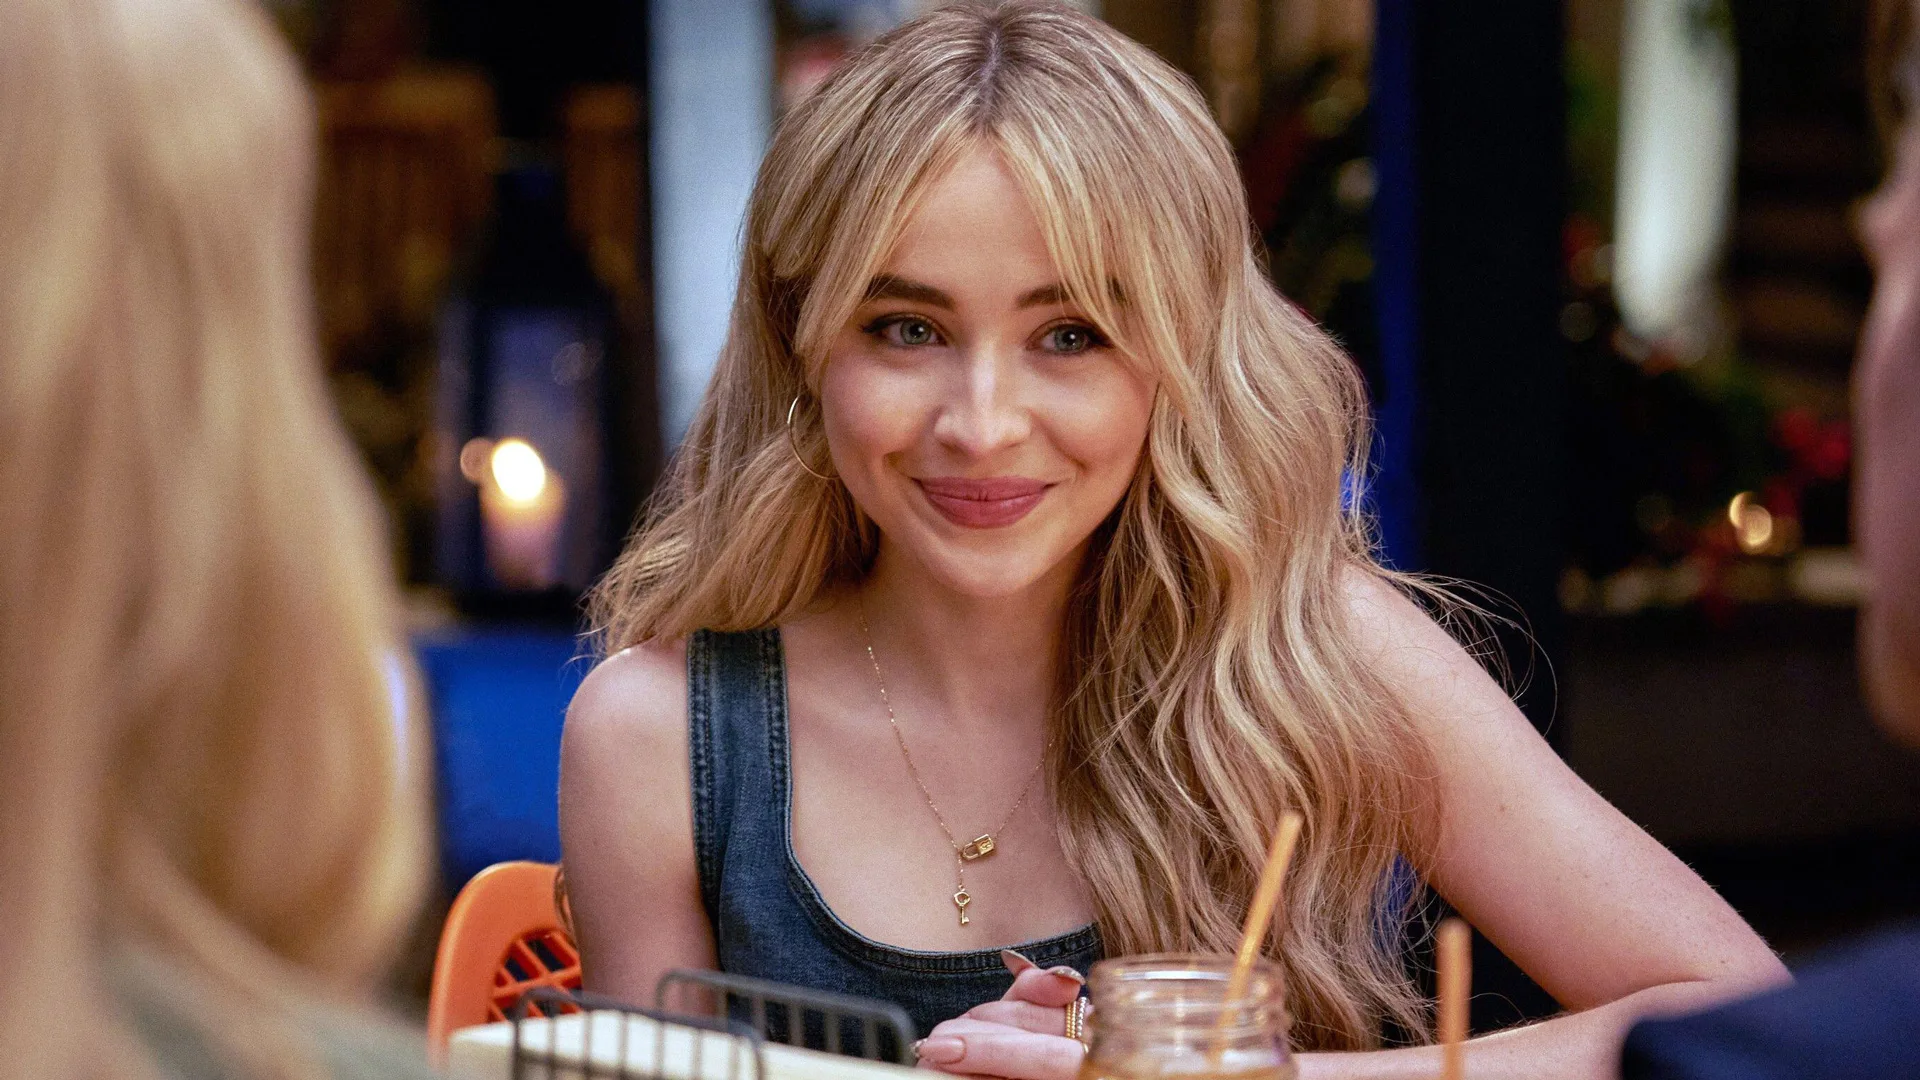 A photograph of Sabrina Carpenter in the film Tall Girl smiling at a table with a black top